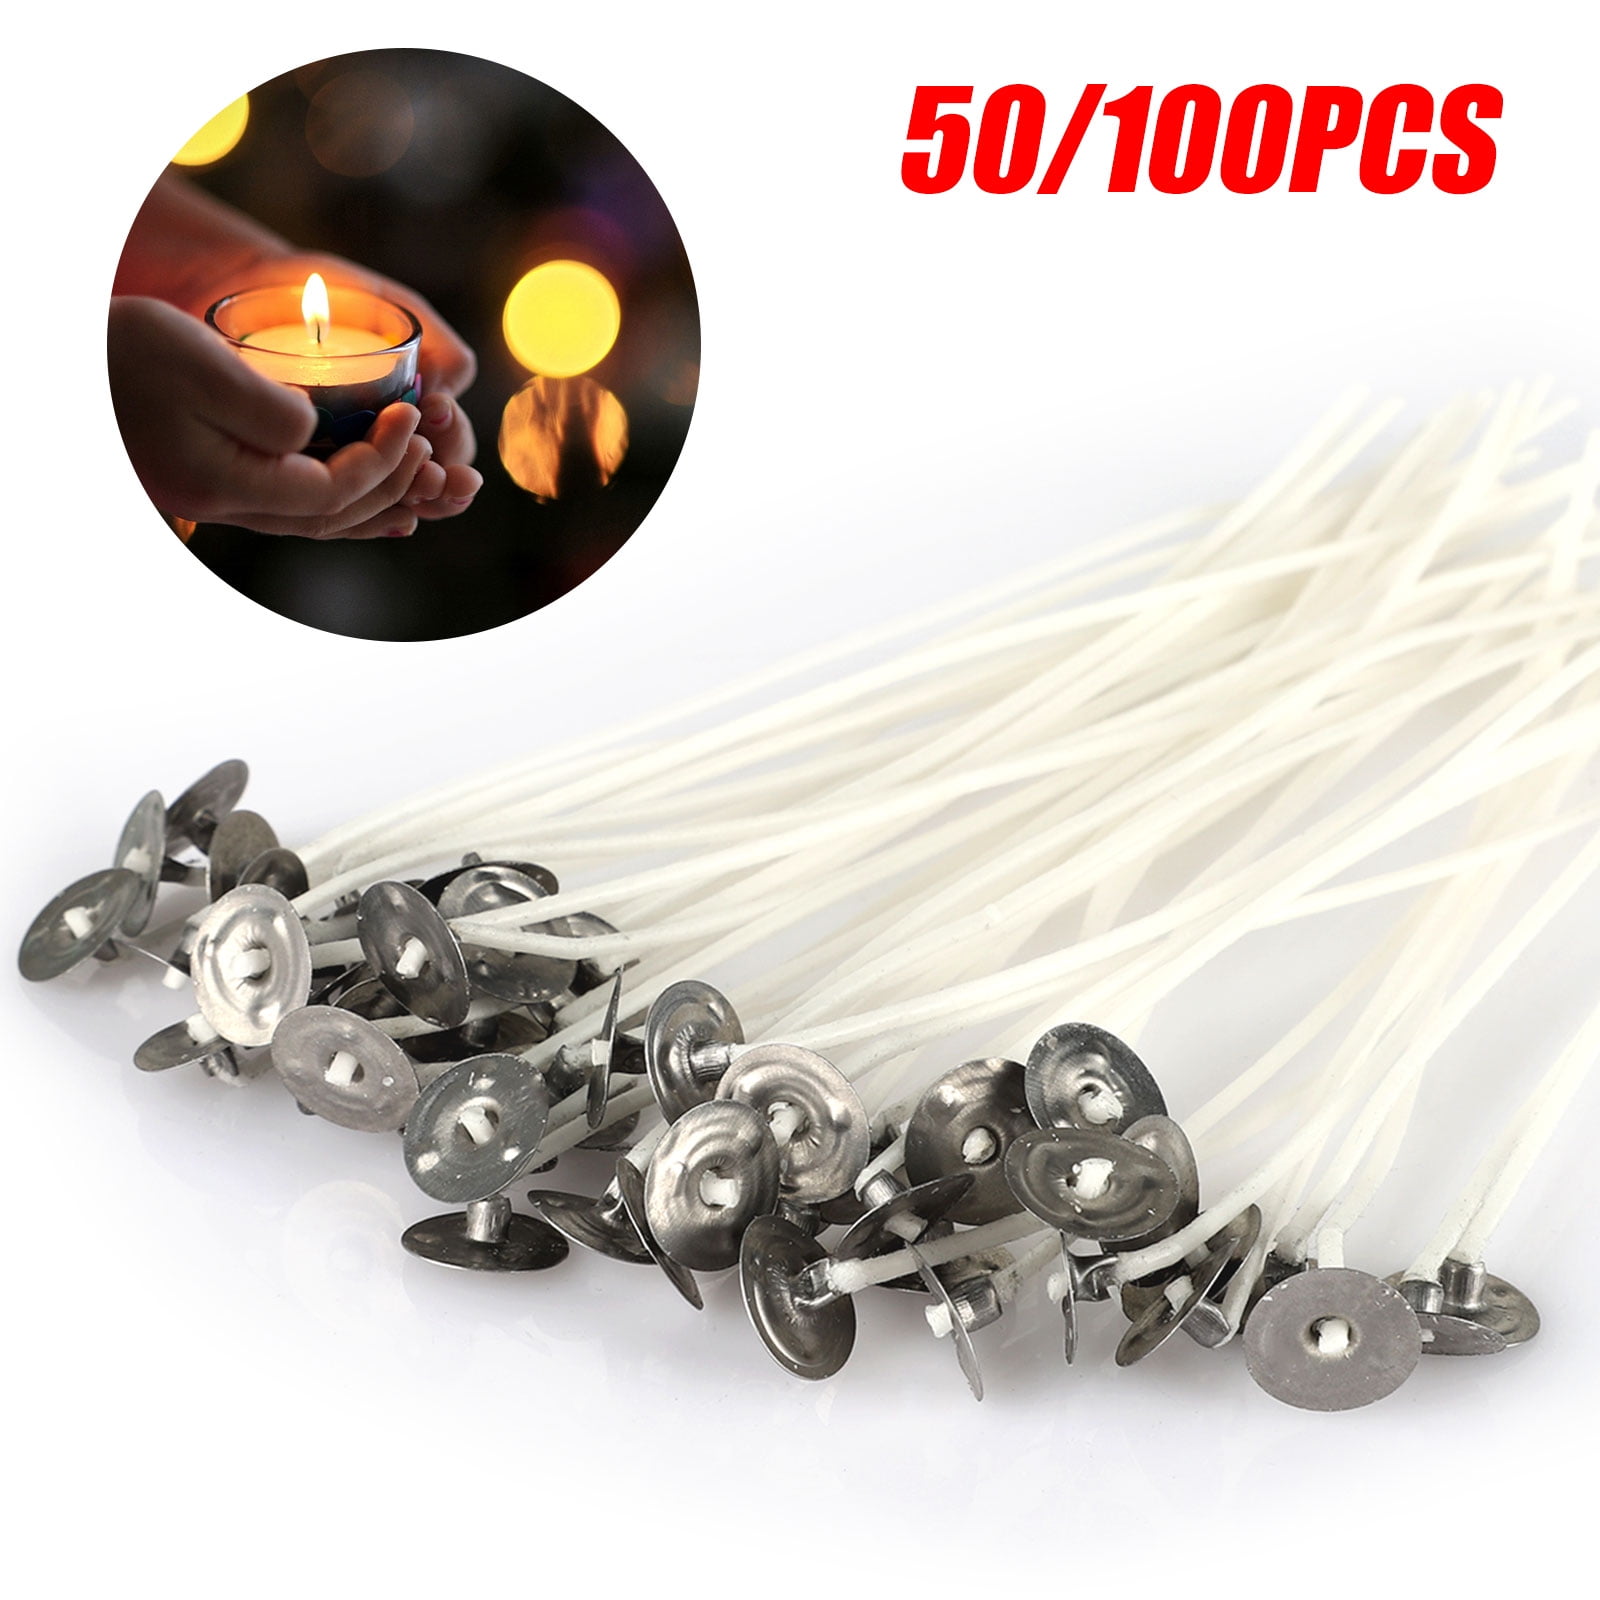 Candle Wicks 6 Inch Cotton Core Candle Making Supplies Pre Tabbed 50/100pcs 